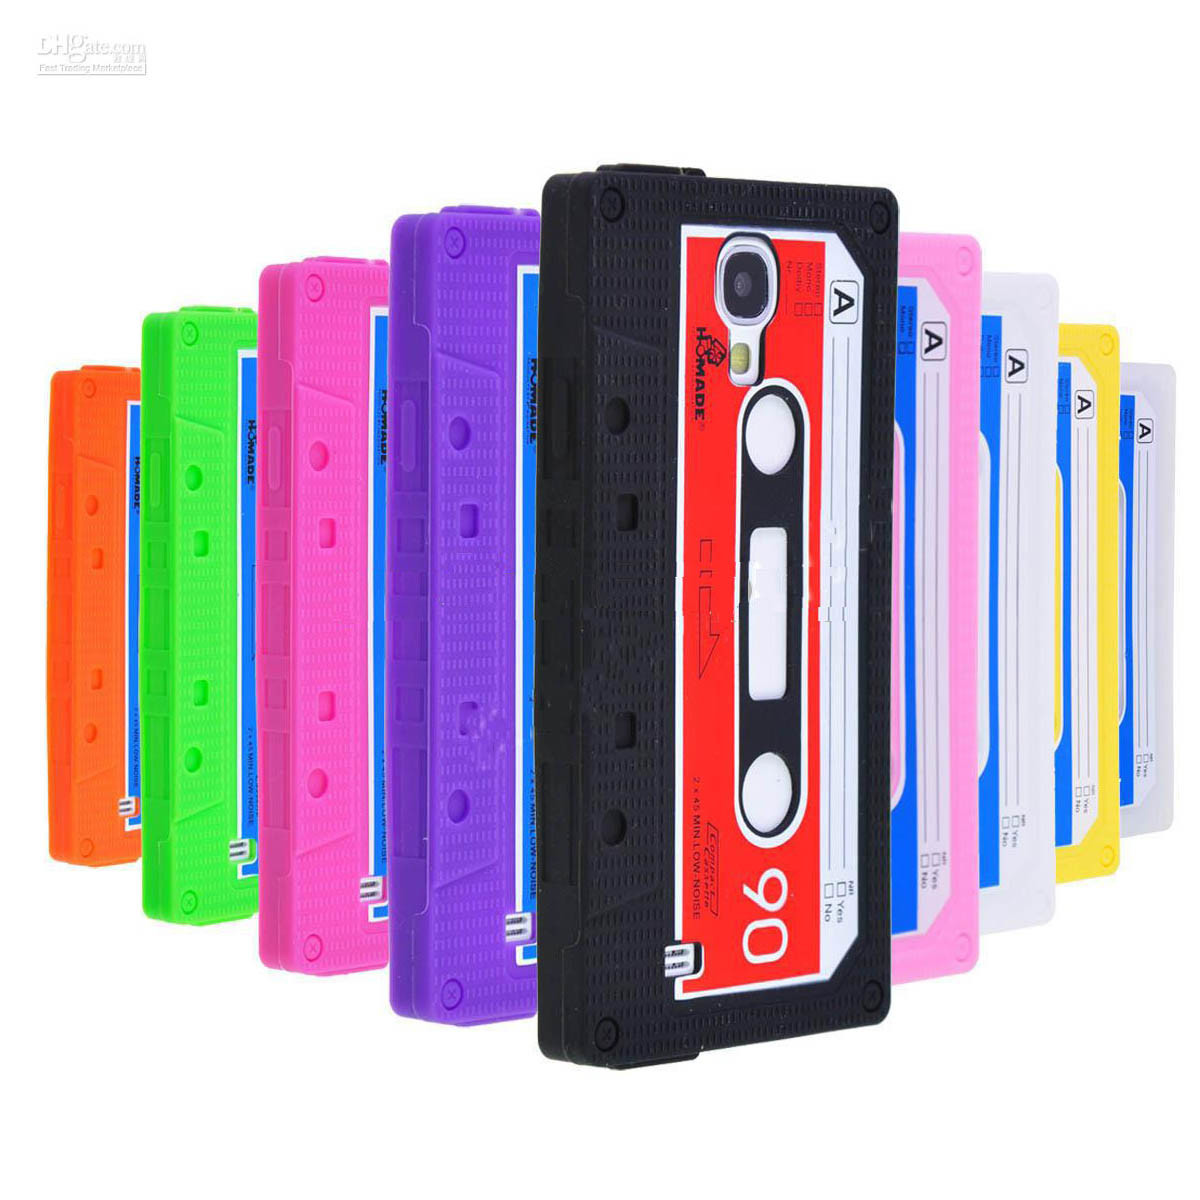 Silicone Cassette Tape Case for Mobile Phone Samsung Galaxy S4 I9500 (13037)